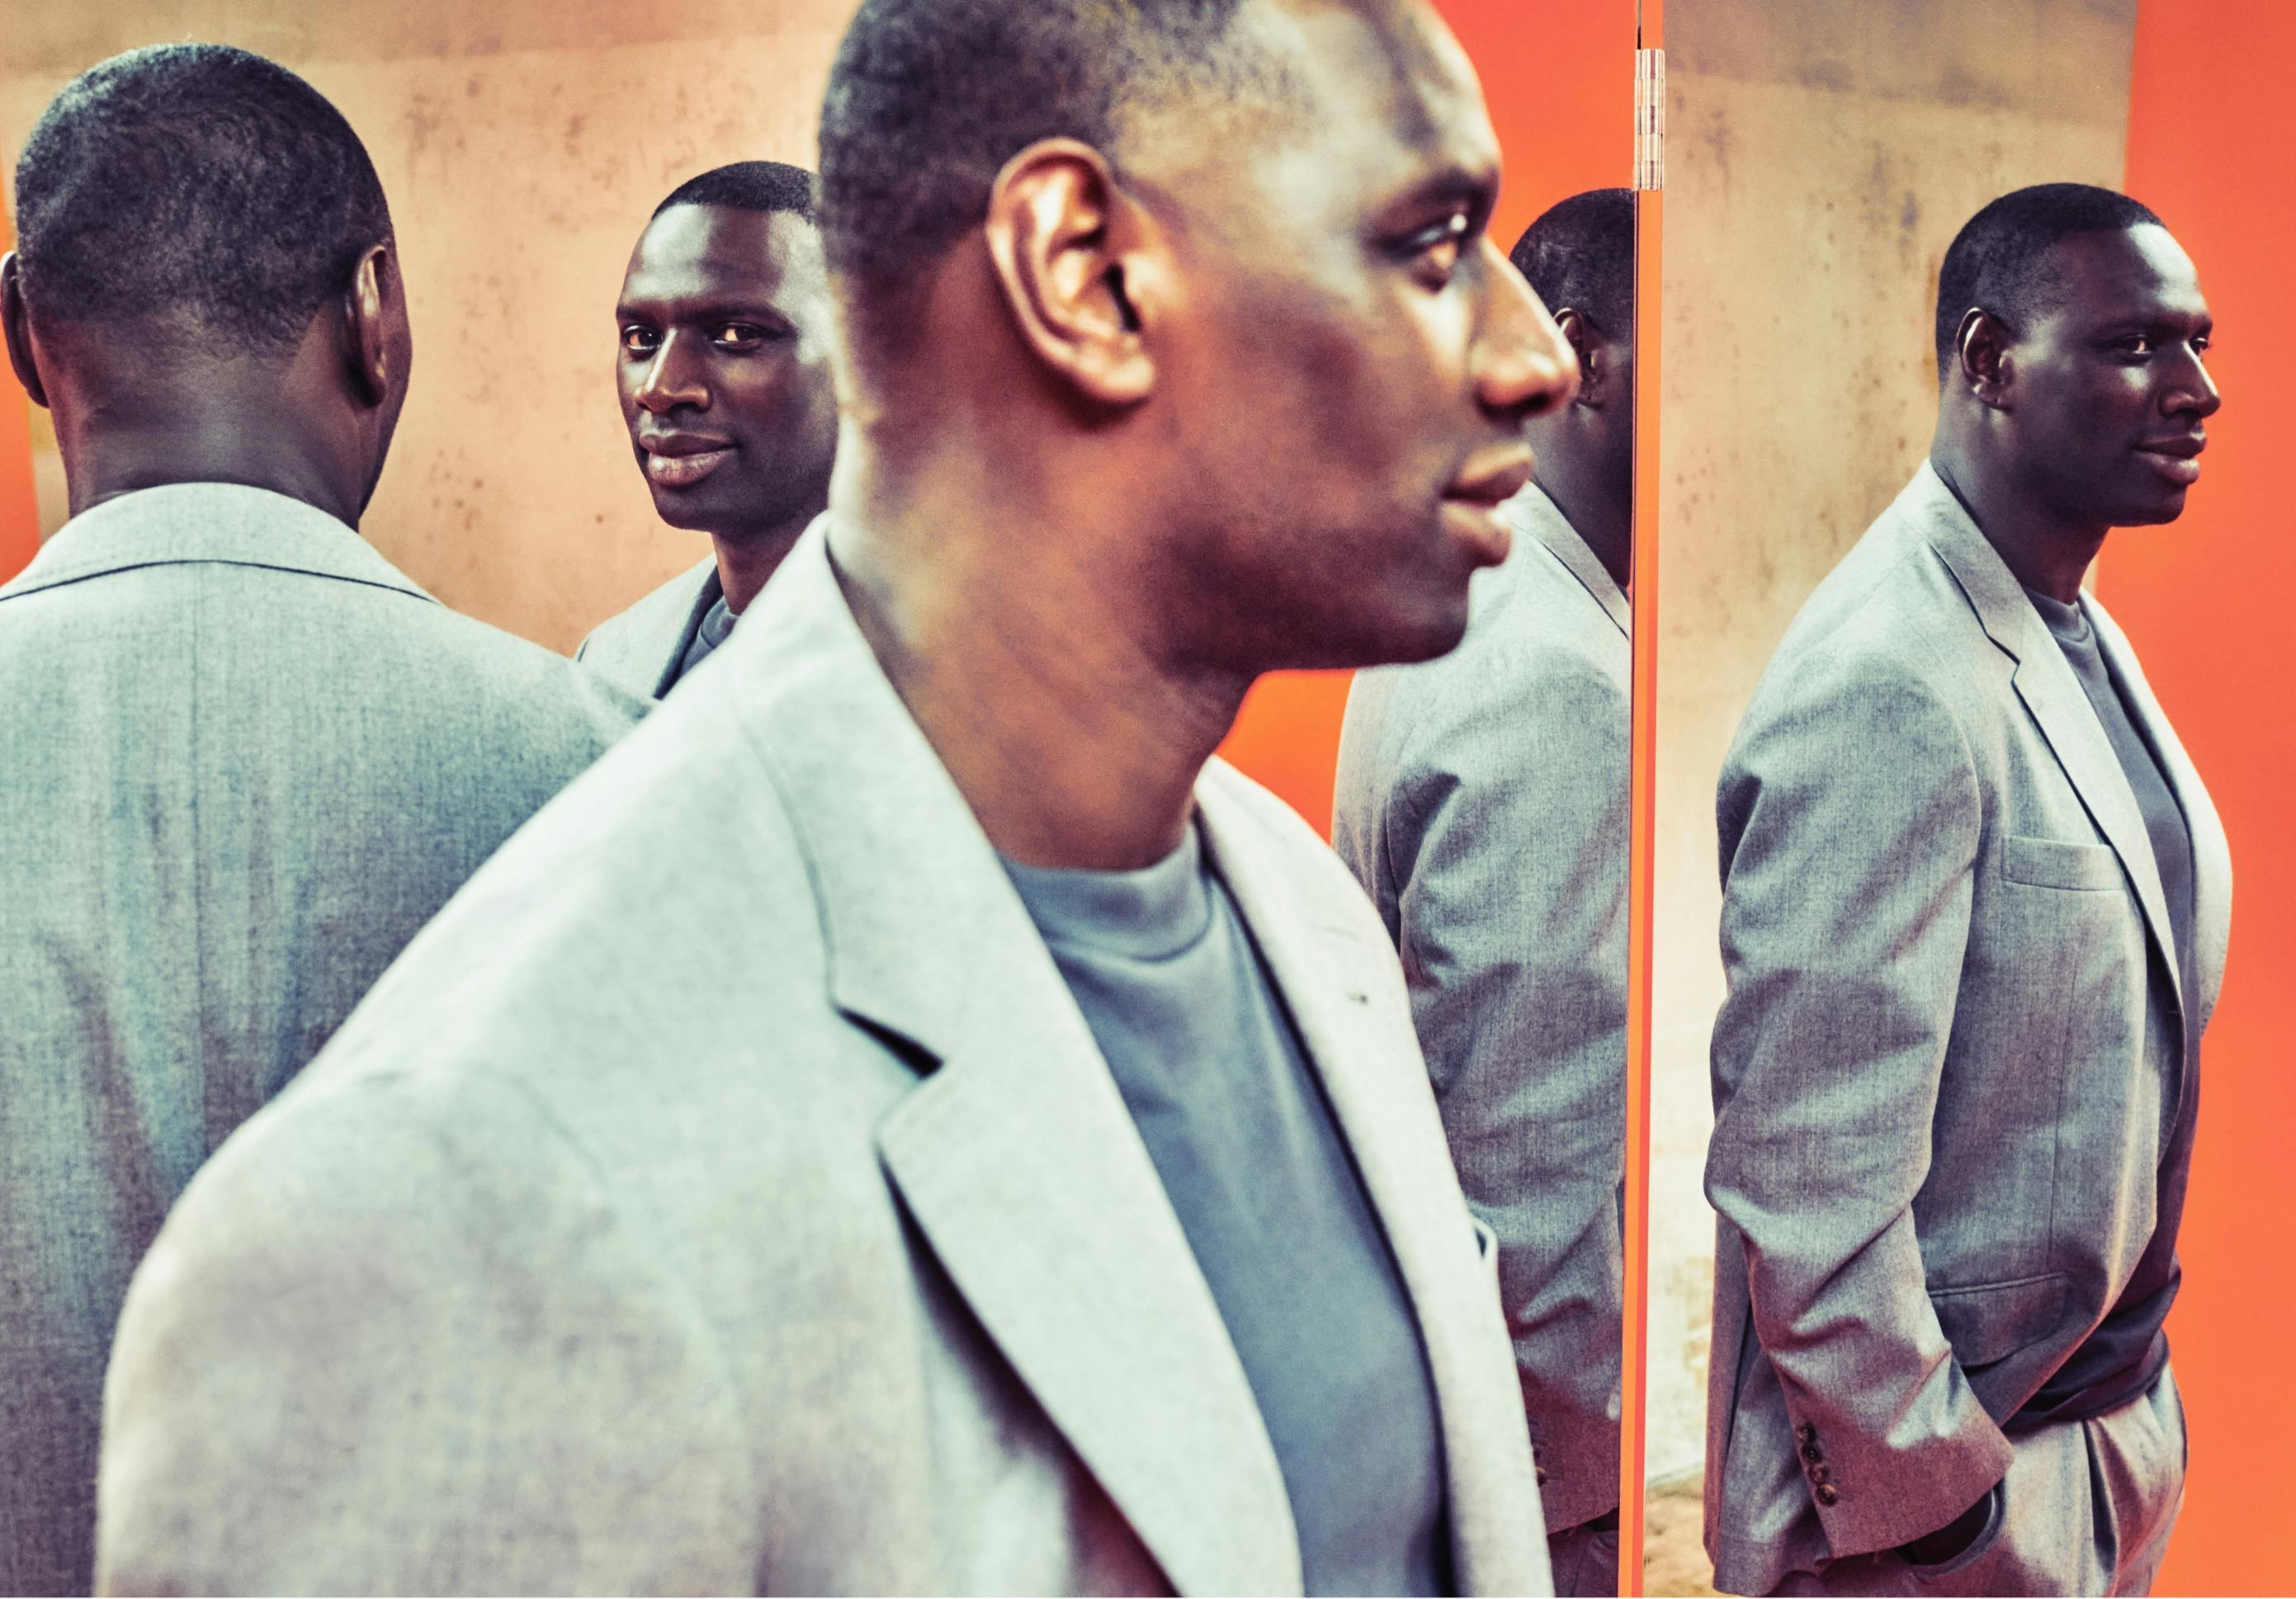 Reflections of Omar Sy populate this brightly colored image. The actor is pictured in a light-colored blazer, which pops against a strong orange background. 